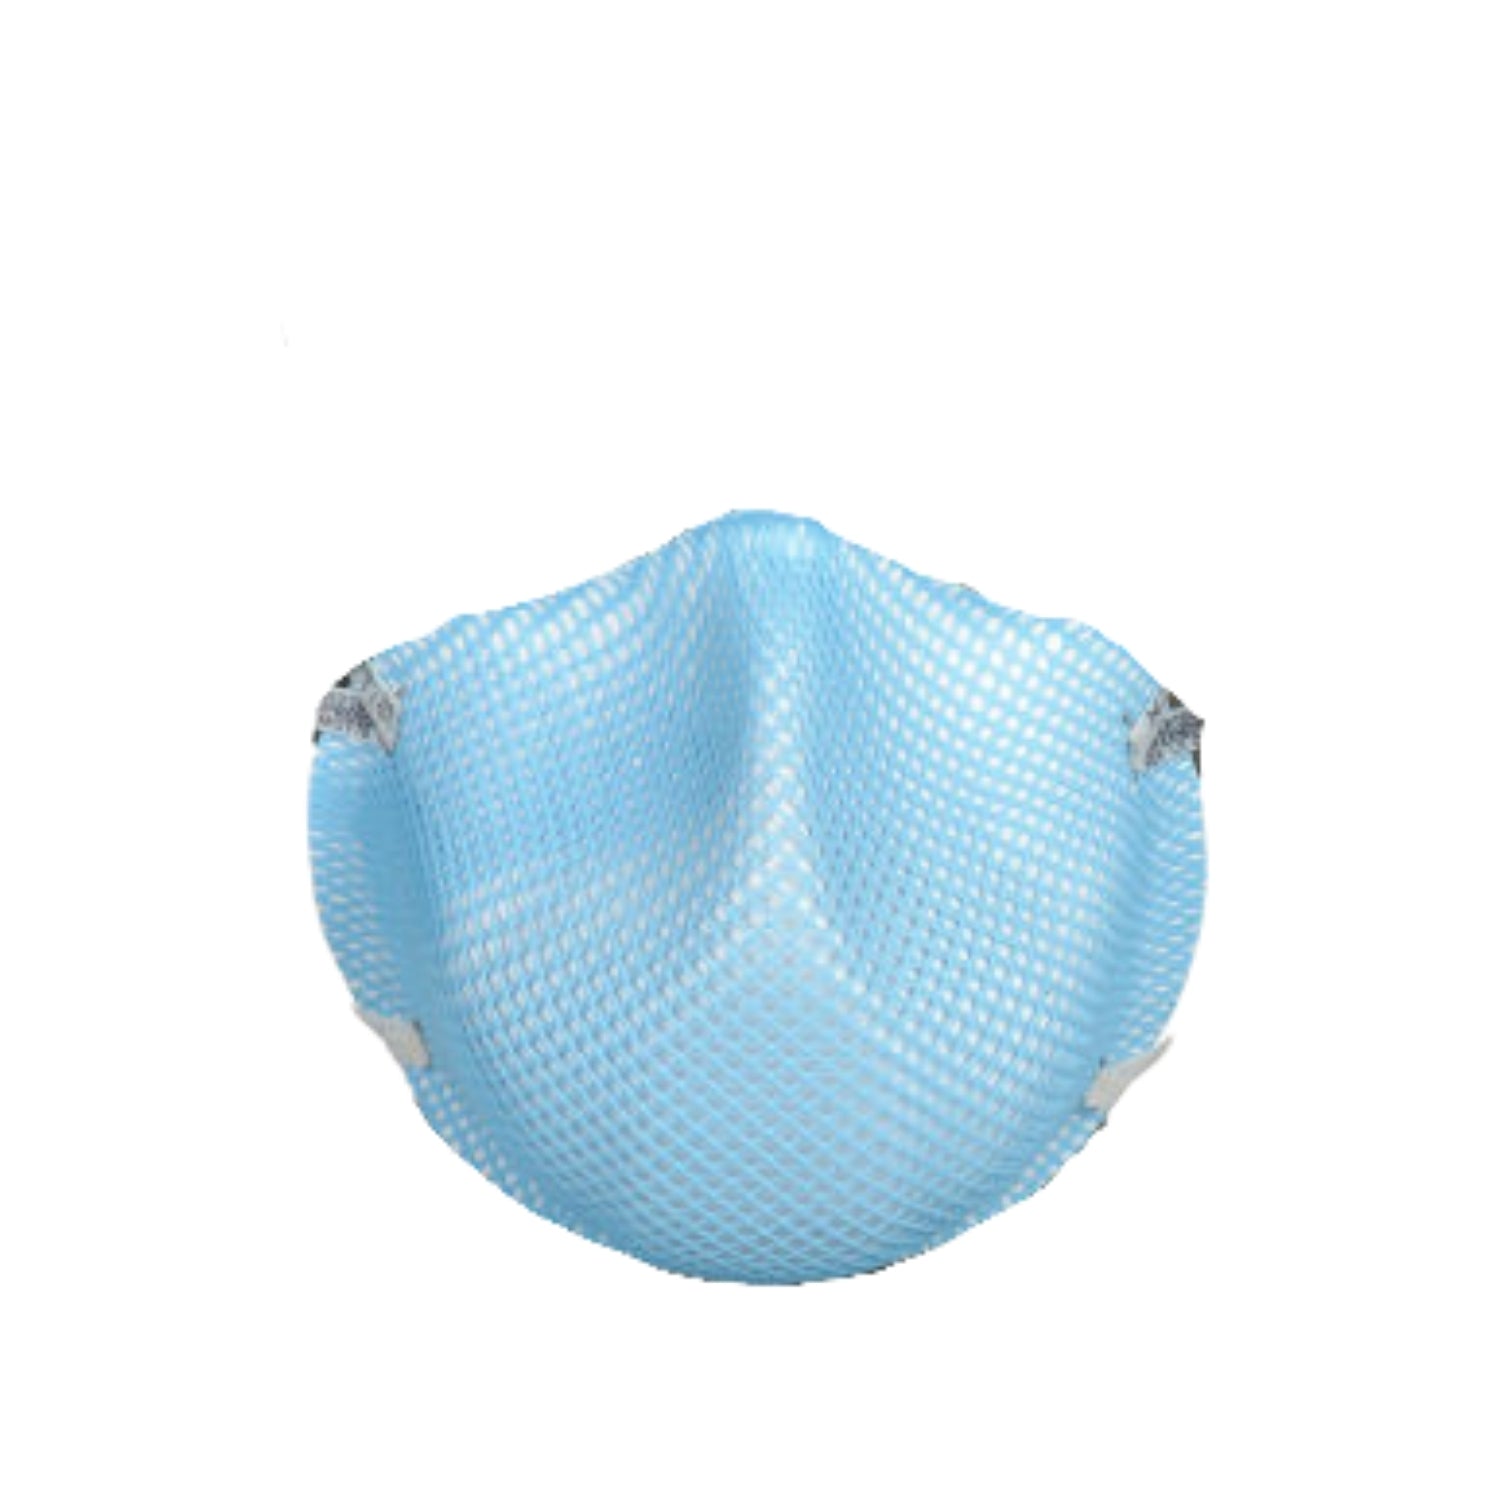 MOLDEX 1511 - N95 1500 Series  Healthcare Particulate Respirators and Surgical Masks, Small - 20/BOX